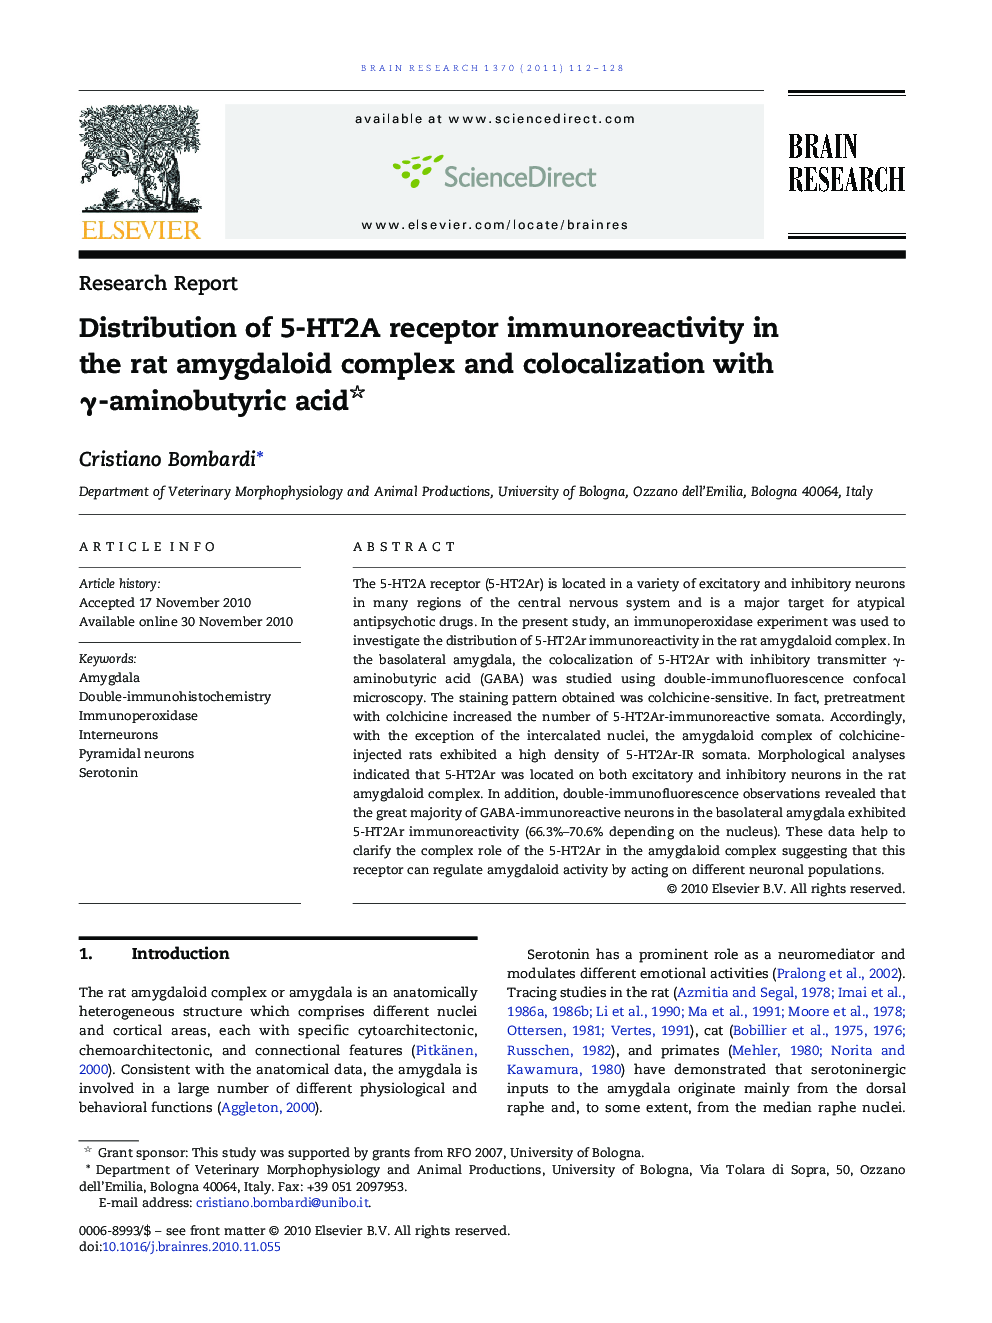 Research ReportDistribution of 5-HT2A receptor immunoreactivity in the rat amygdaloid complex and colocalization with Î³-aminobutyric acid